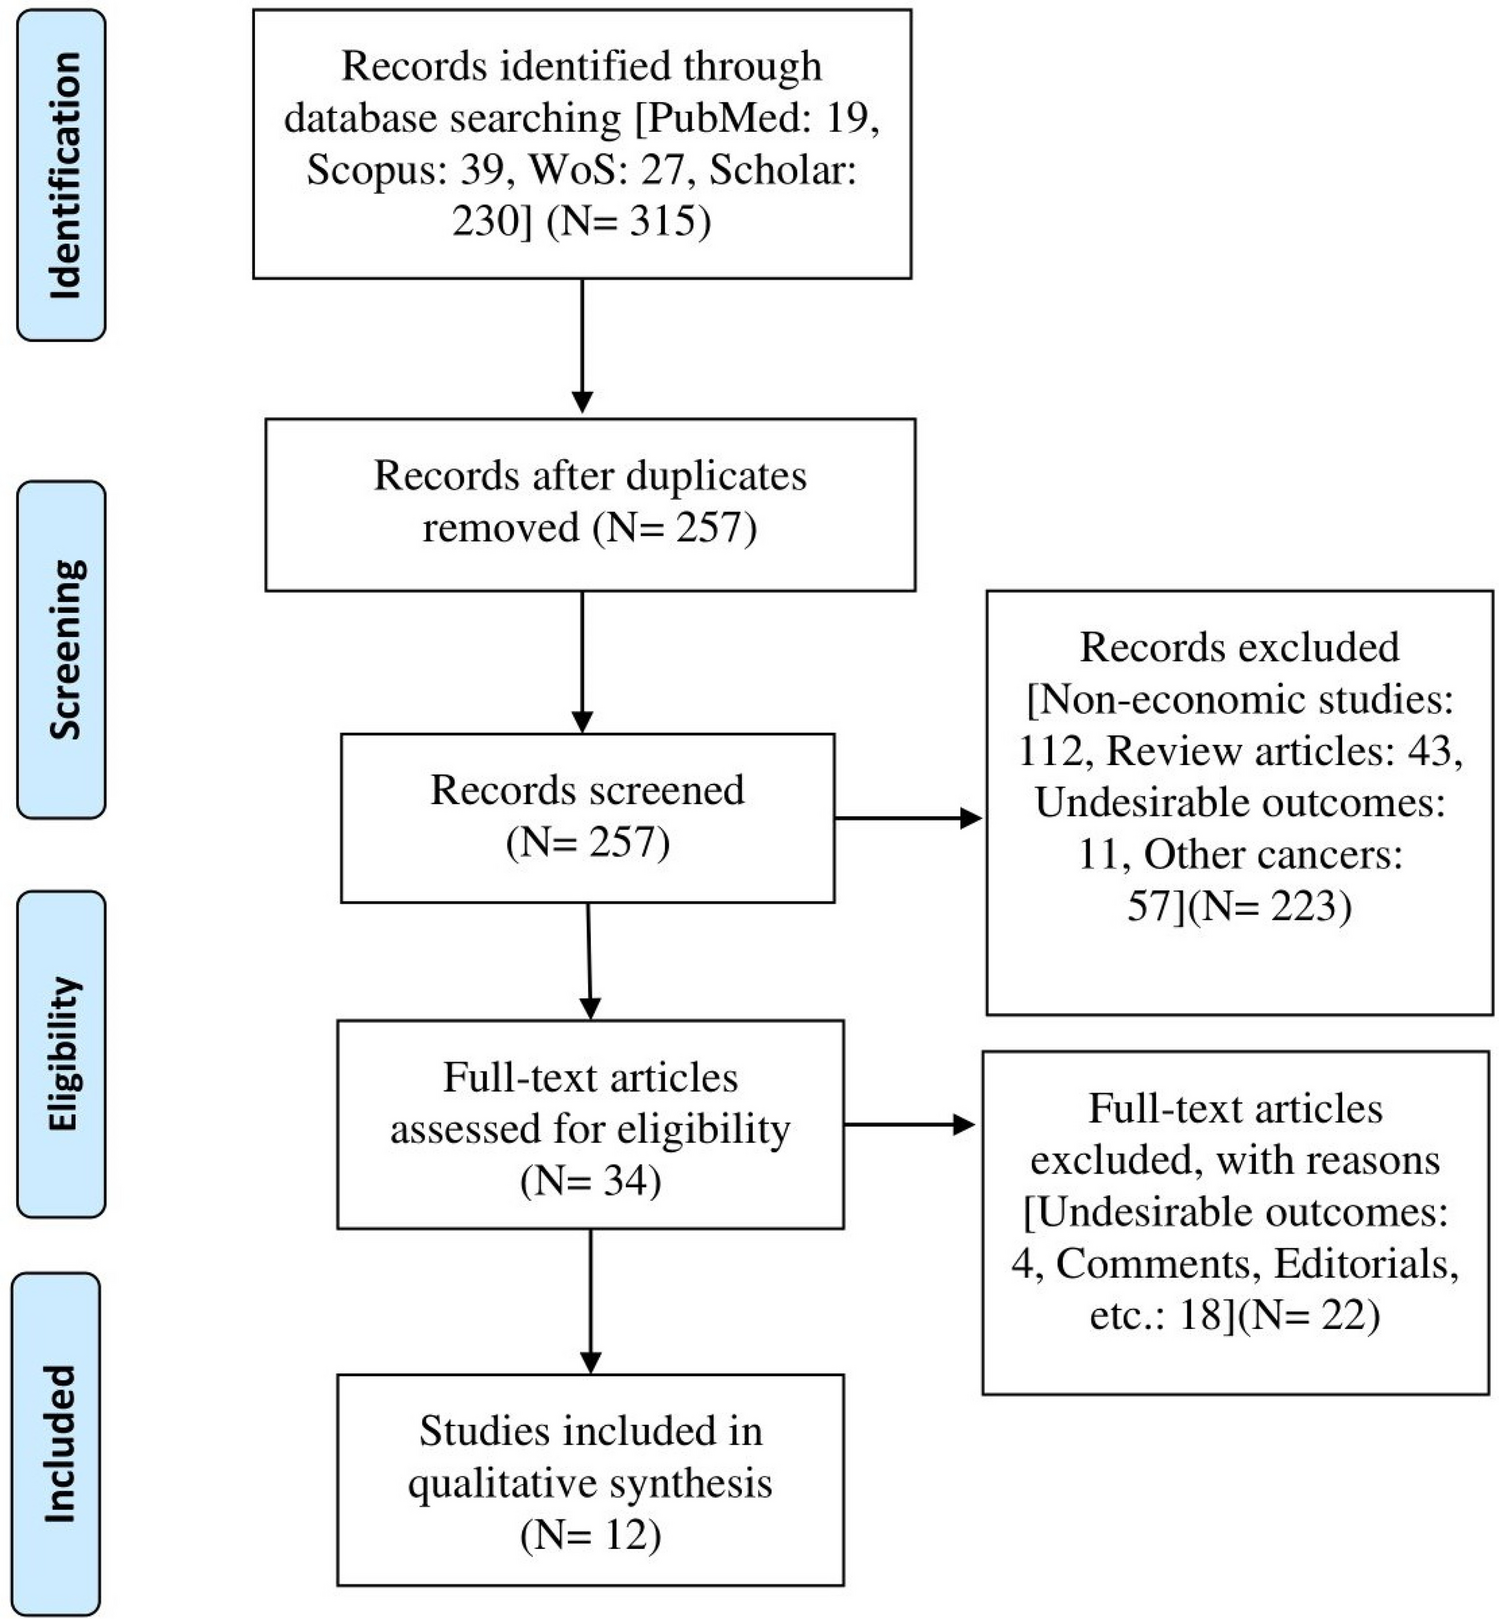 Atezolizumab and Bevacizumab Targeted-Therapy in Advanced Hepatocellular Carcinoma: A Systematic Review of Cost-effectiveness Analyses